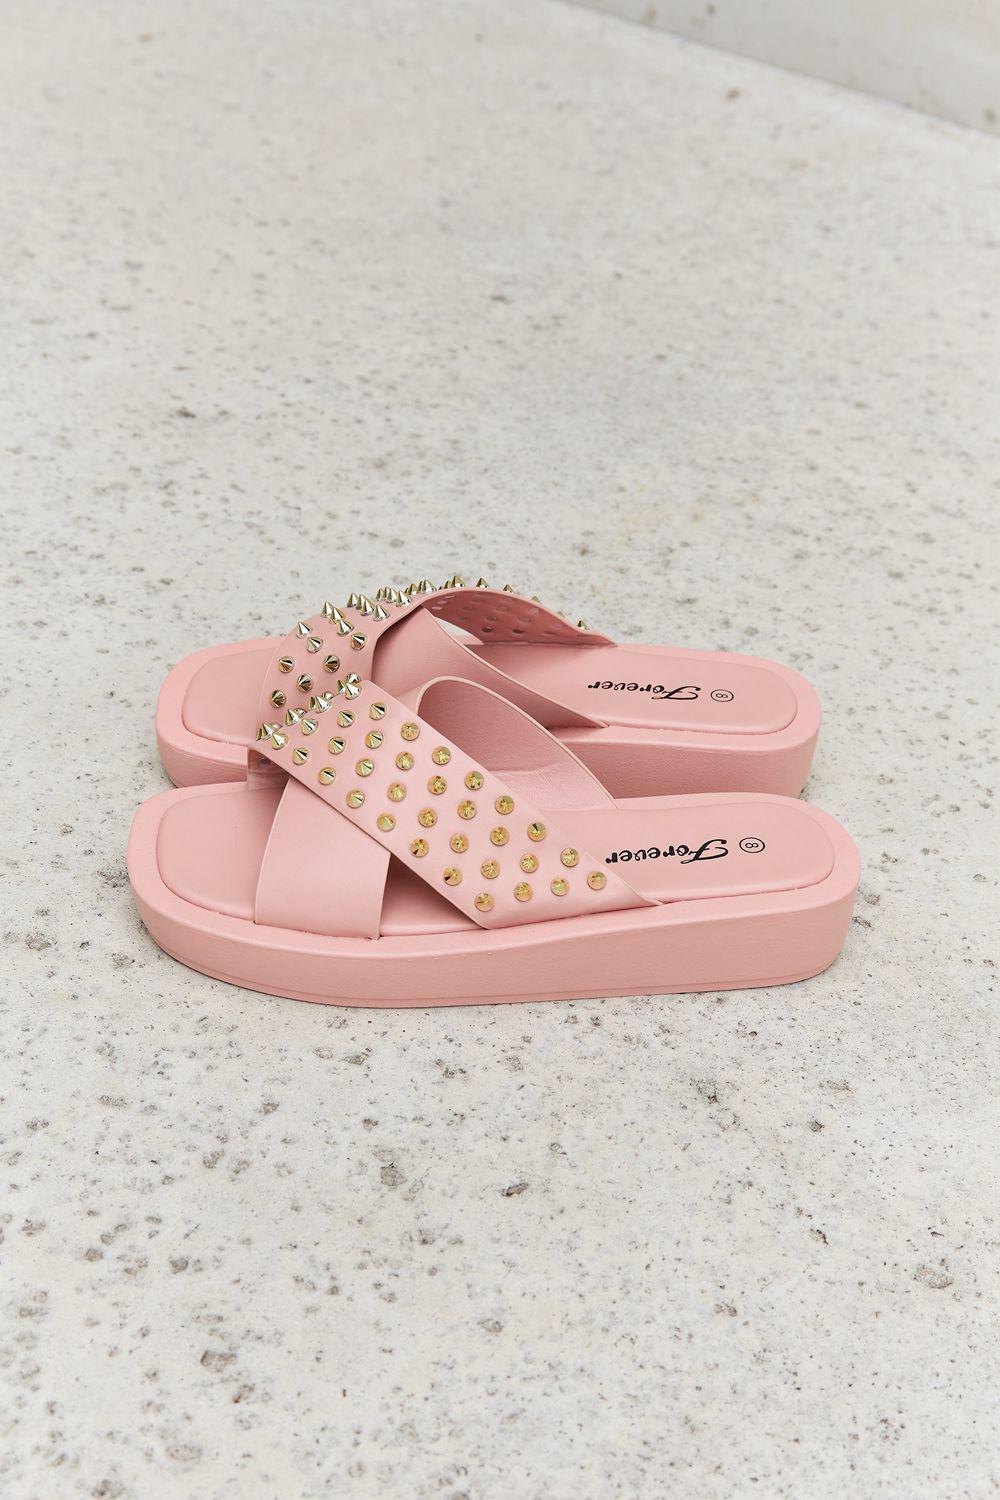 Forever Link Studded Cross Strap Sandals in Blush BLUE ZONE PLANET